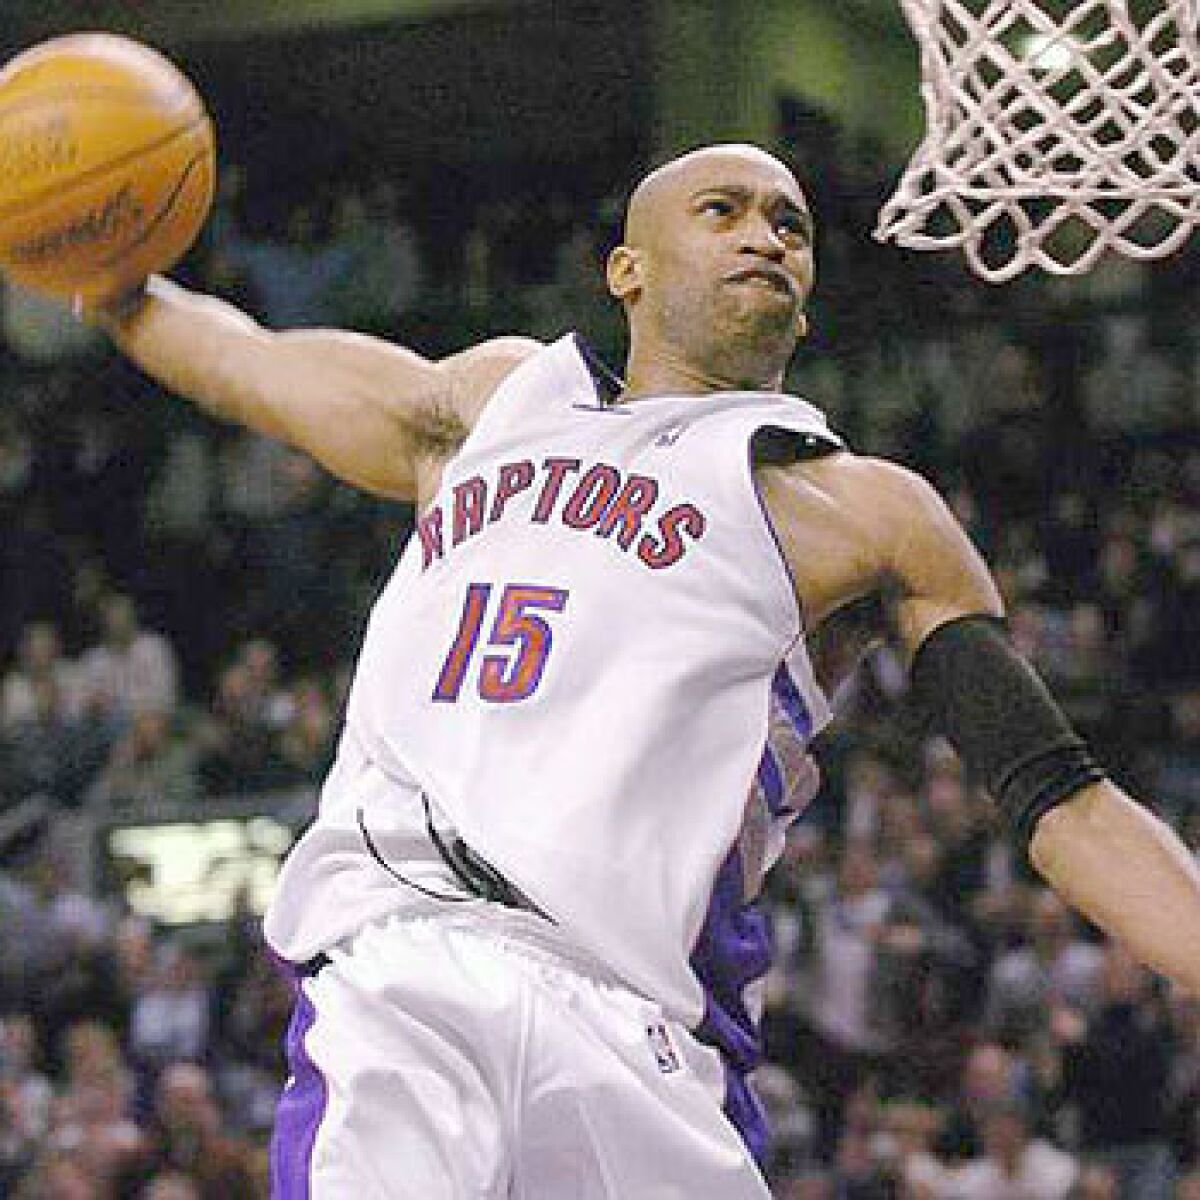 Vince Carter elevates for a slam dunk during his playing days with the Toronto Raptors.